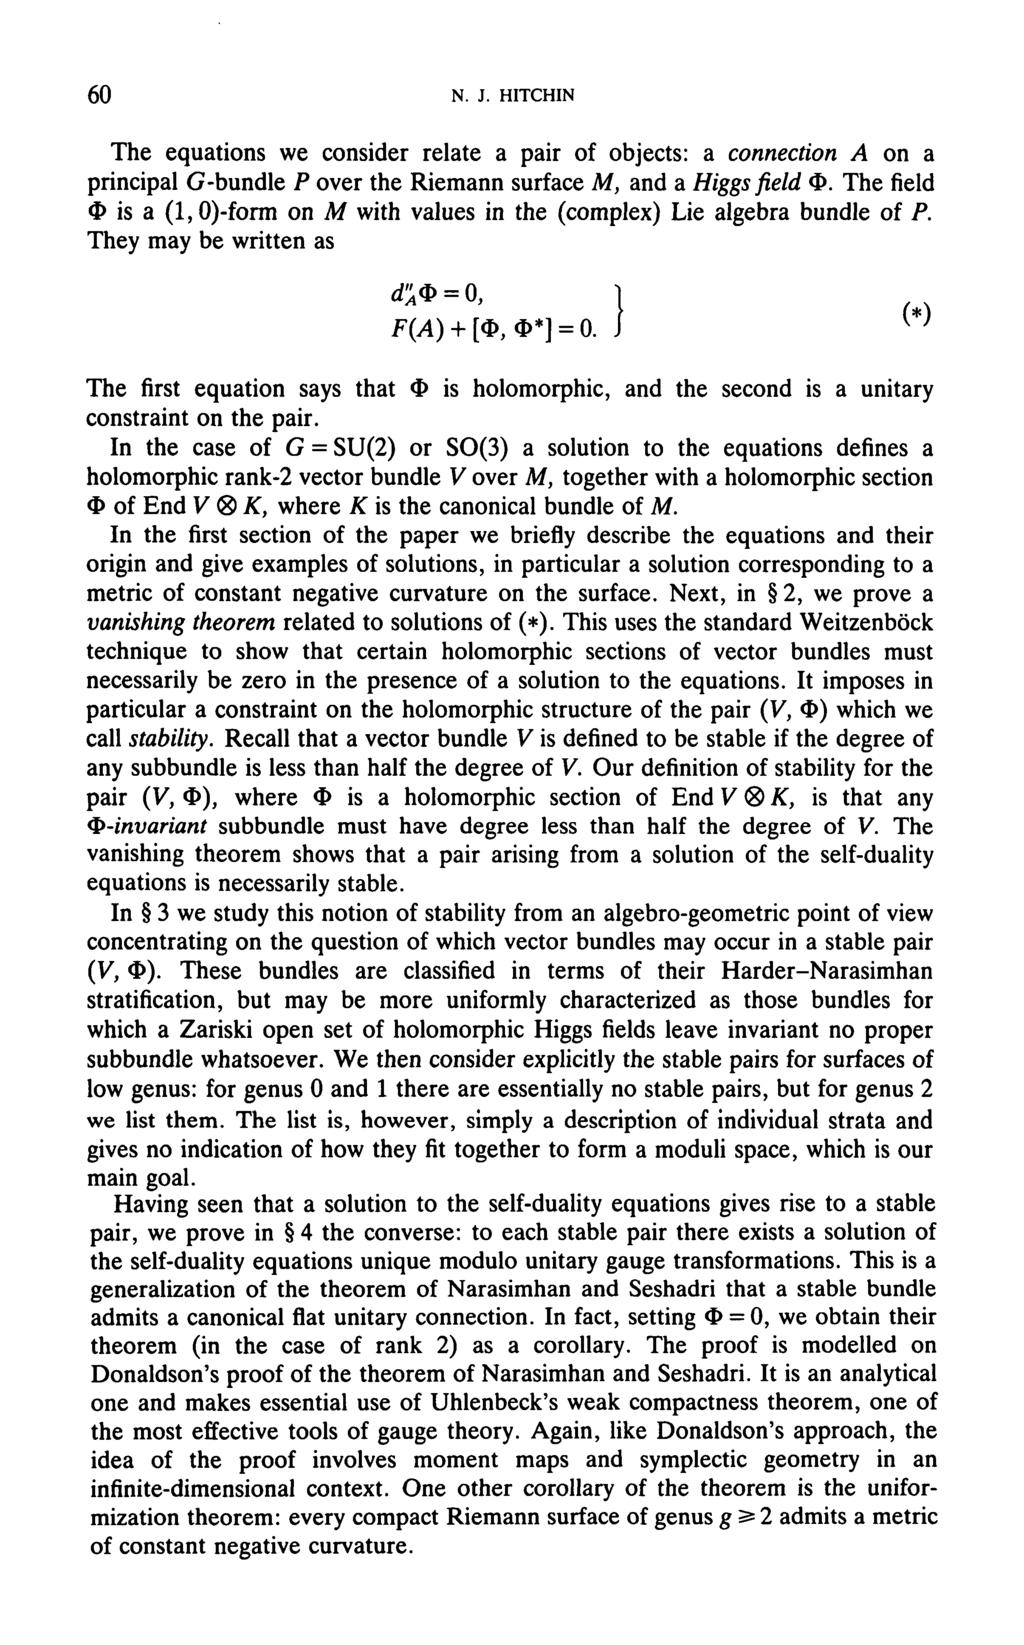 60 N. J. HITCHIN The equations we consider relate a pair of objects: a connection A on a principal G-bundle P over the Riemann surface M, and a Higgs field $>.